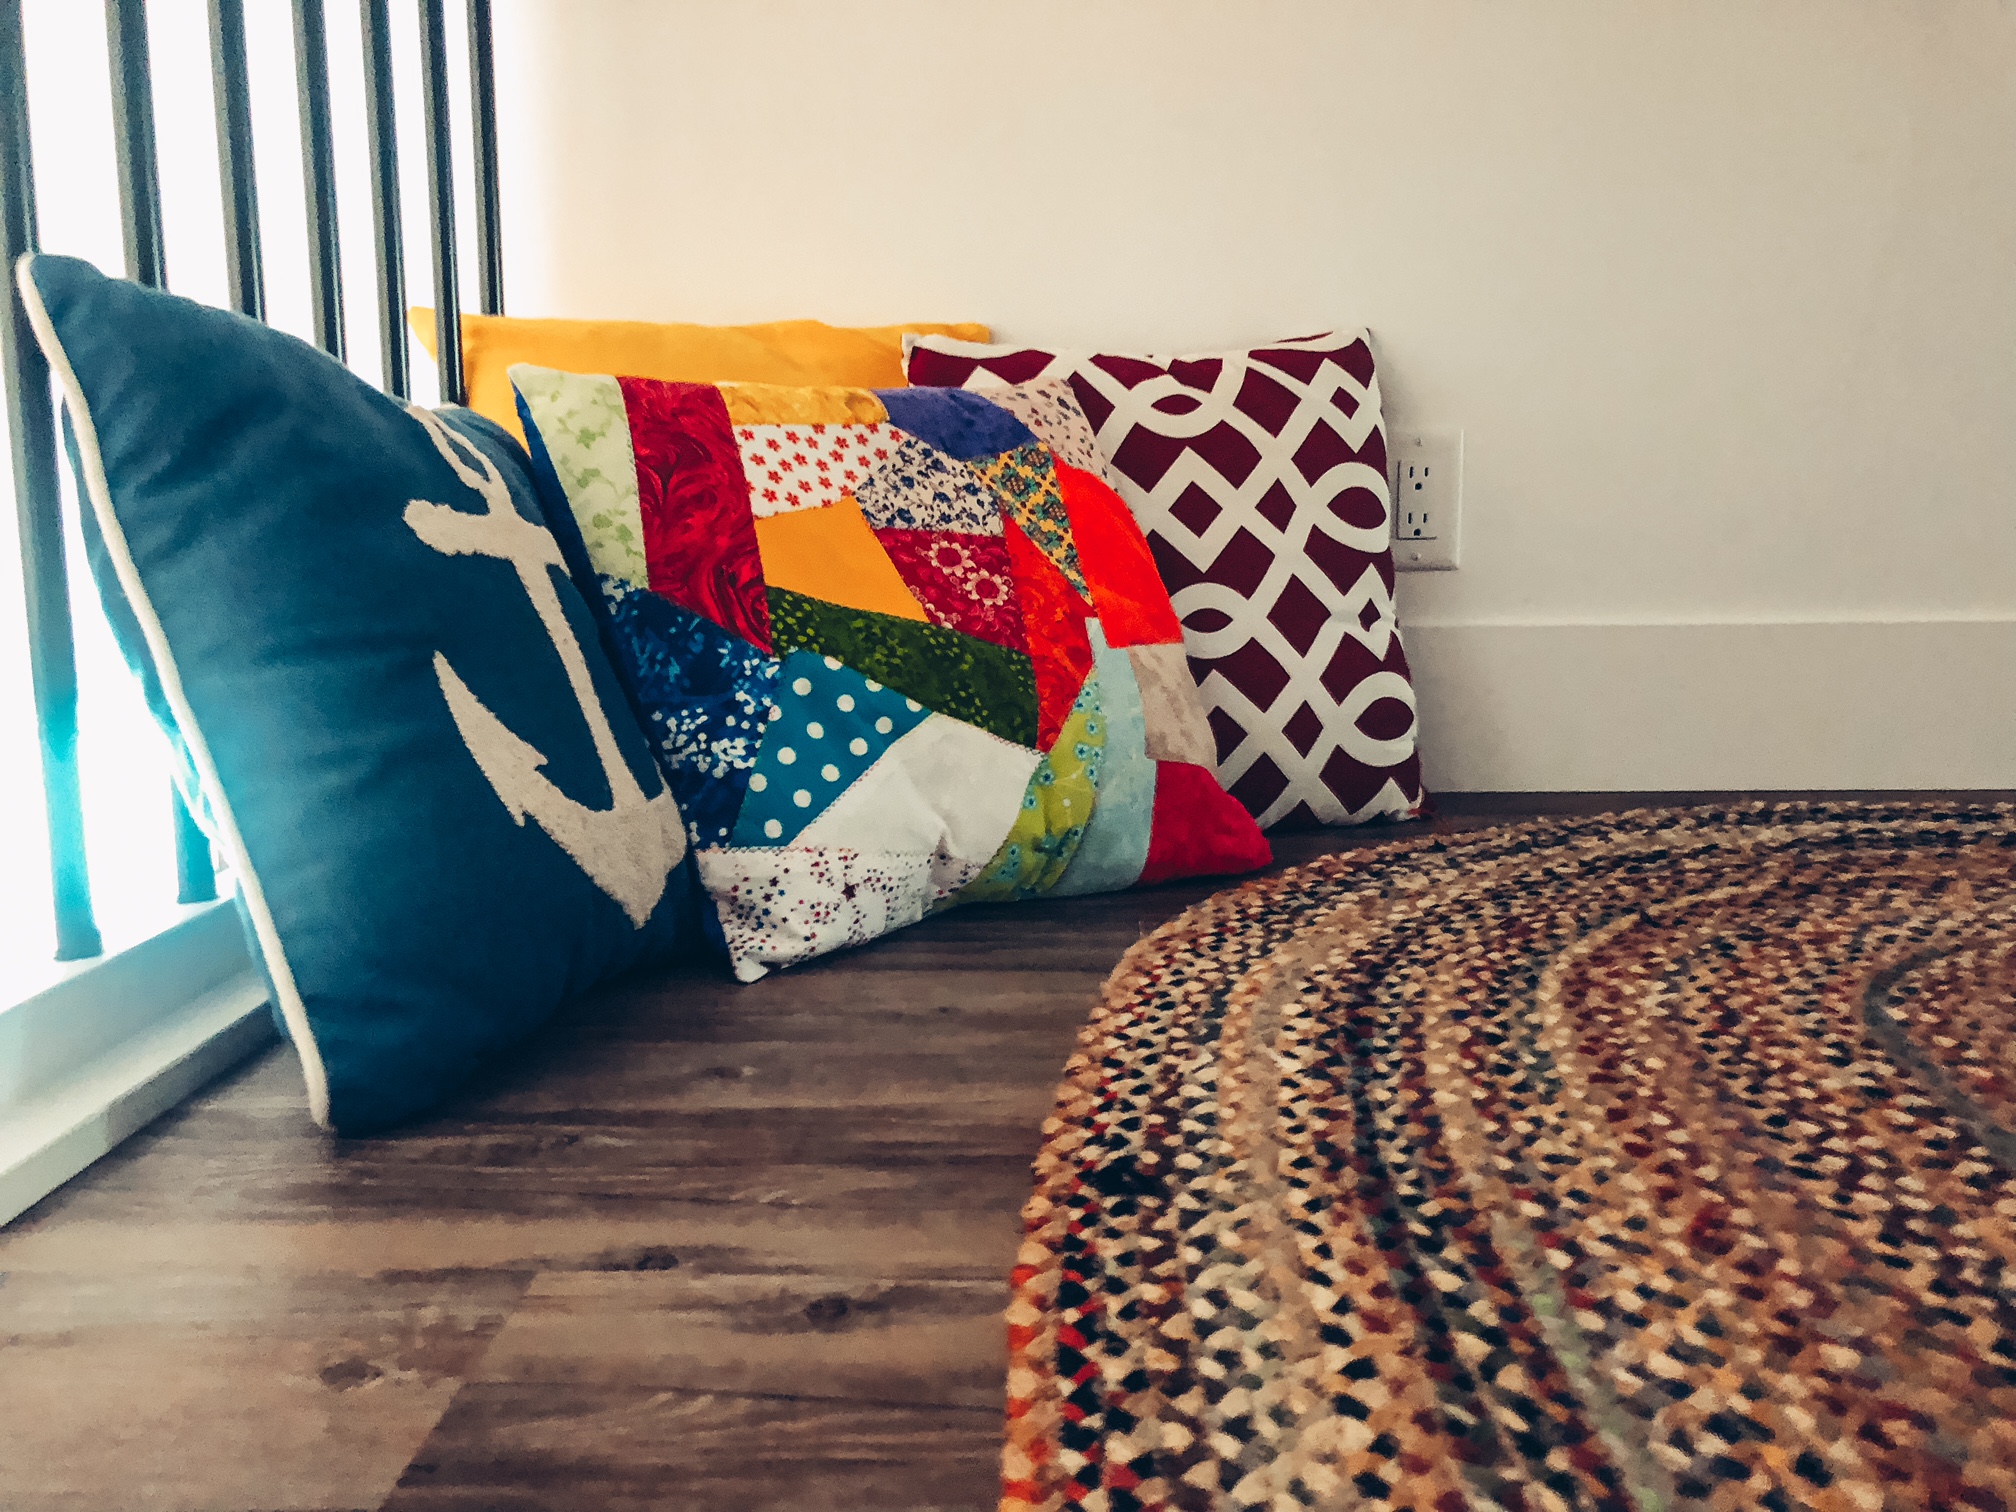 A photo of the corner of the loft room with some colourful cushions placed on the floor.